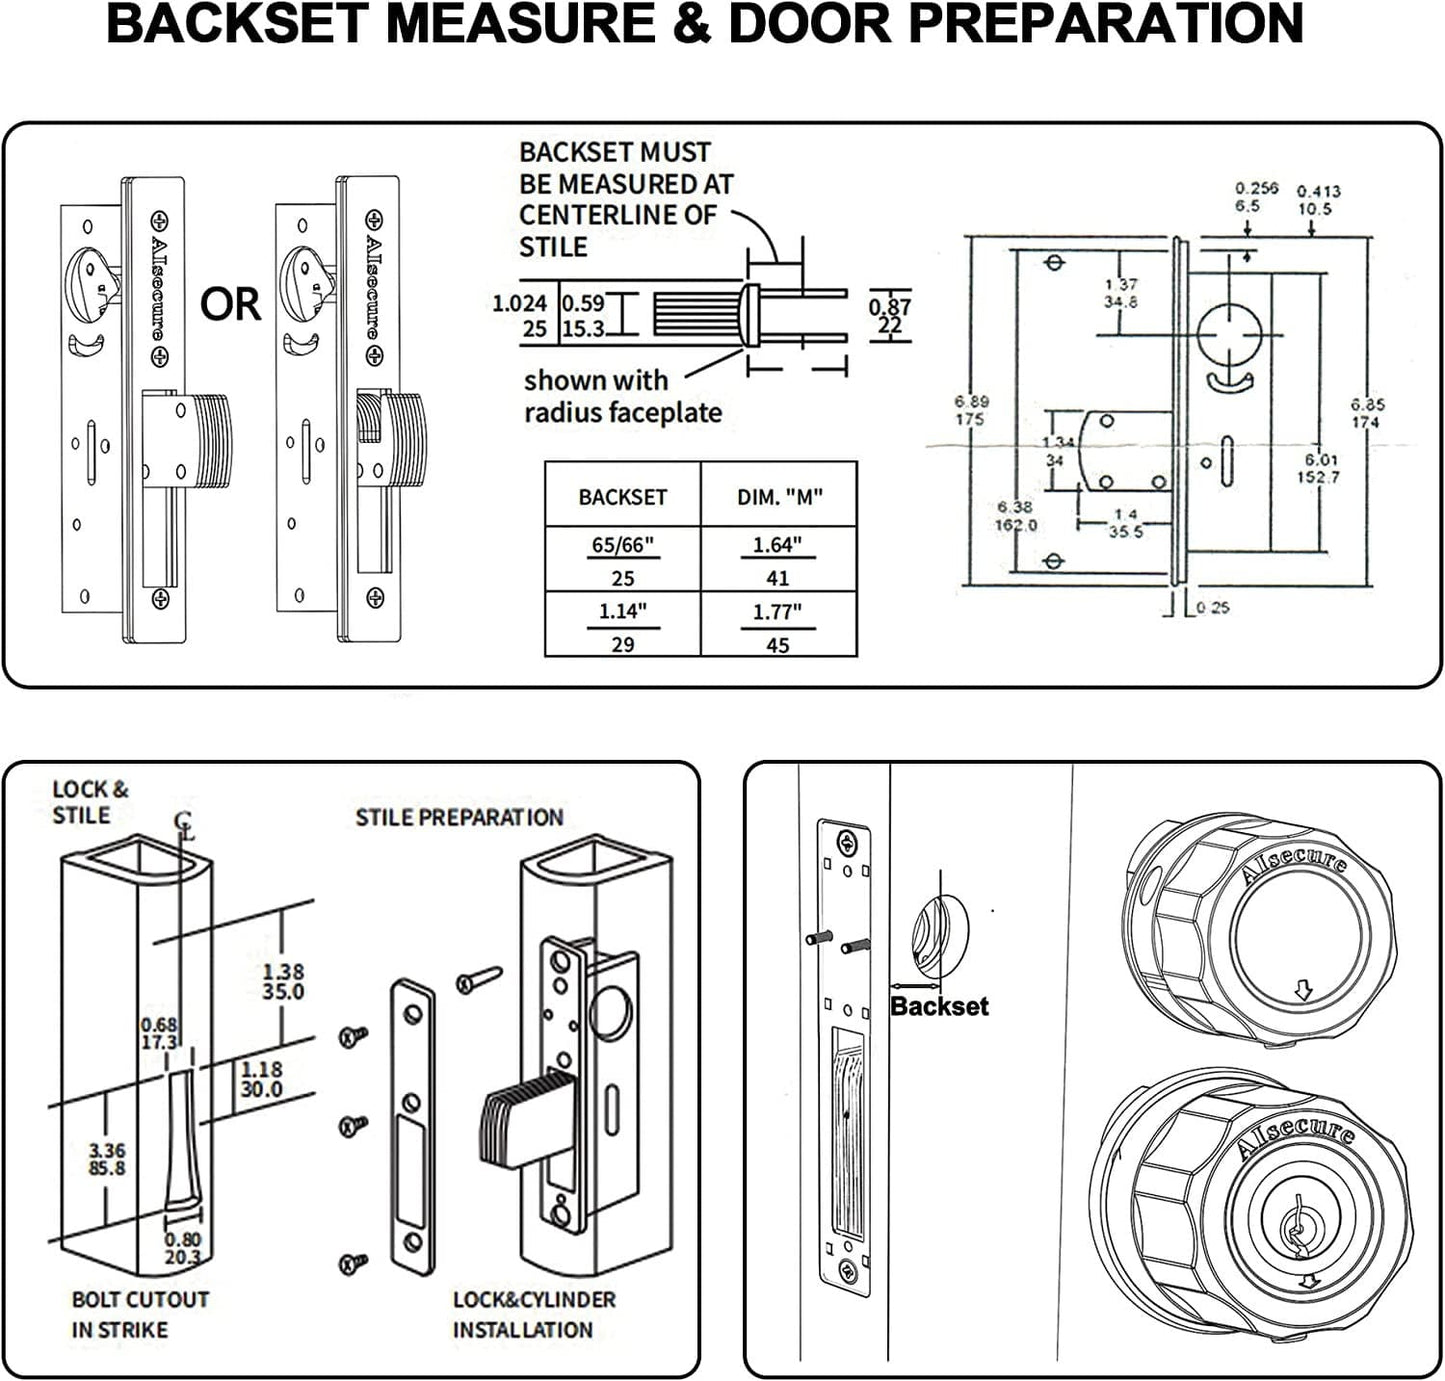 Alsecure Twist-to-Lock Storefront Door Lock Keyless with Anti-Mislock Button,Hook Deadbolt& 2 Cylinder Combo Keyed Alike,Commerical Mortise Lock Structure Inaccessible Bypass Tool Redesign,1-1/8".